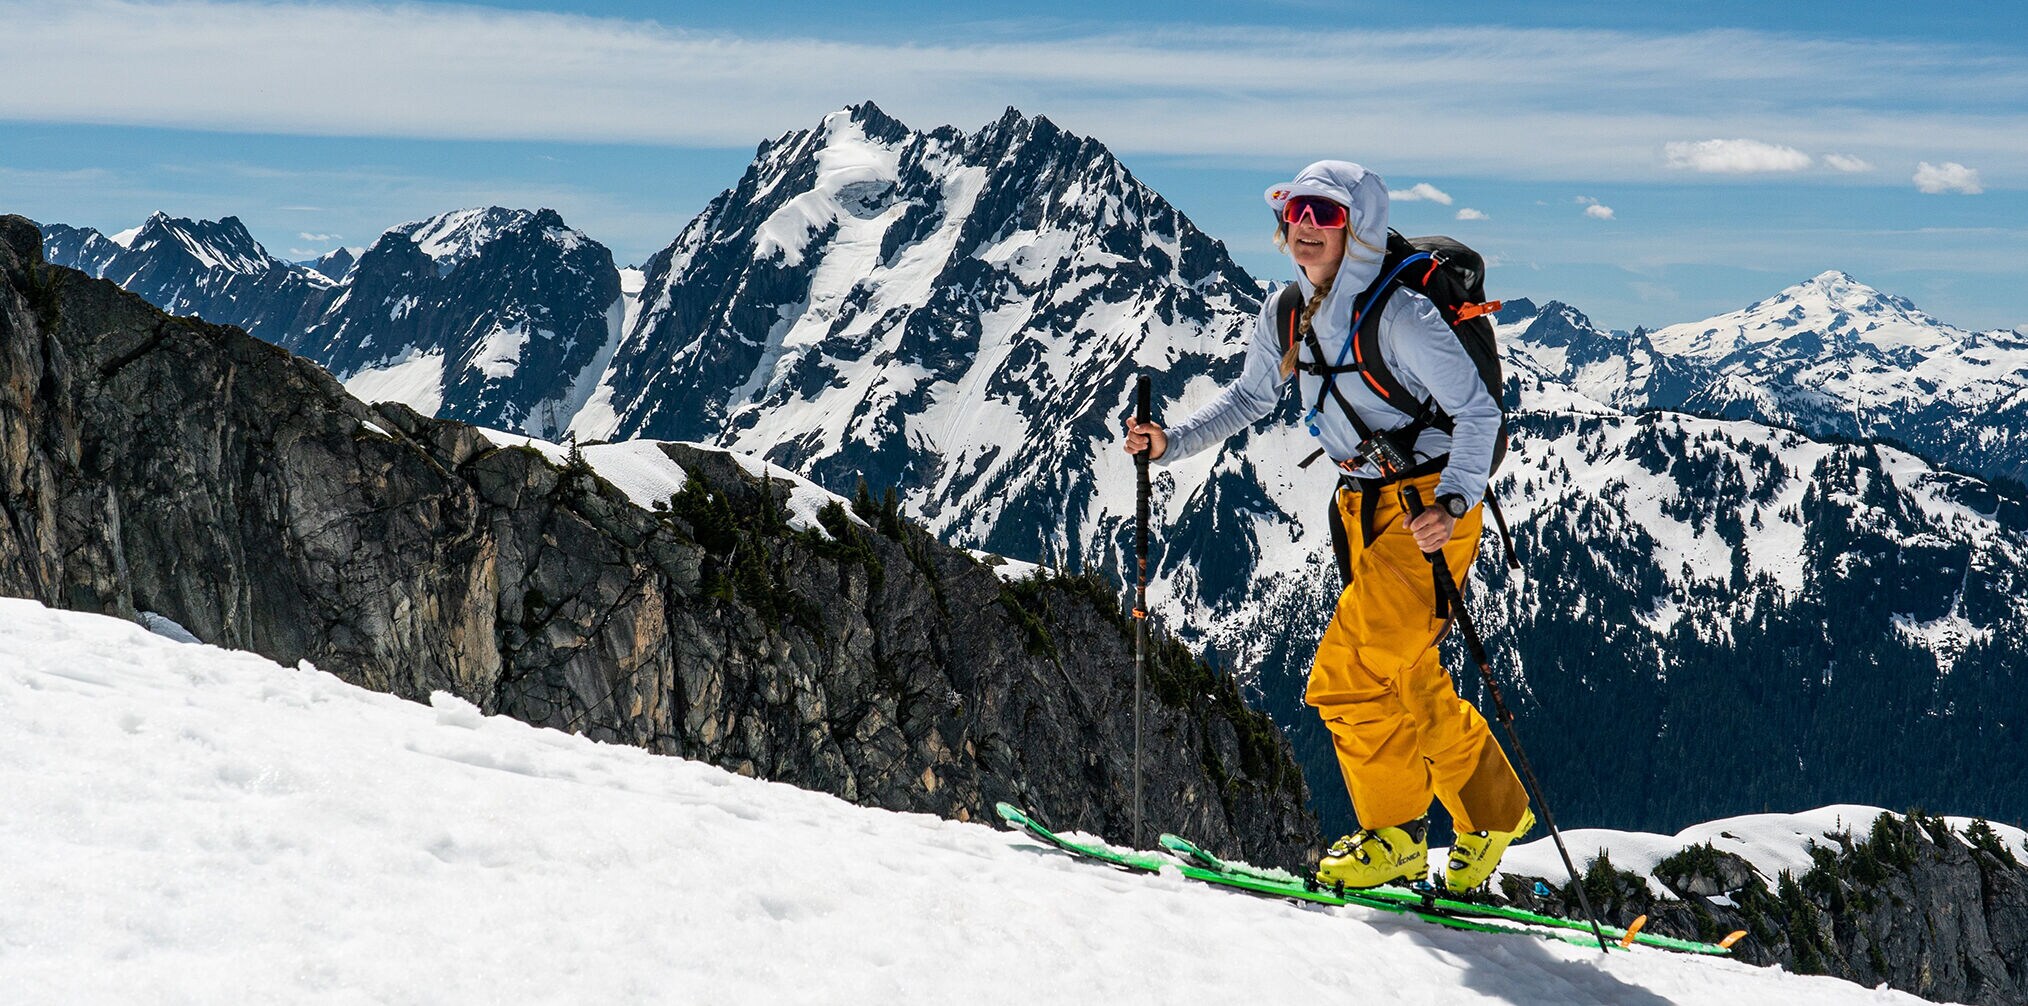 A woman is hiking with her ski on the mountain